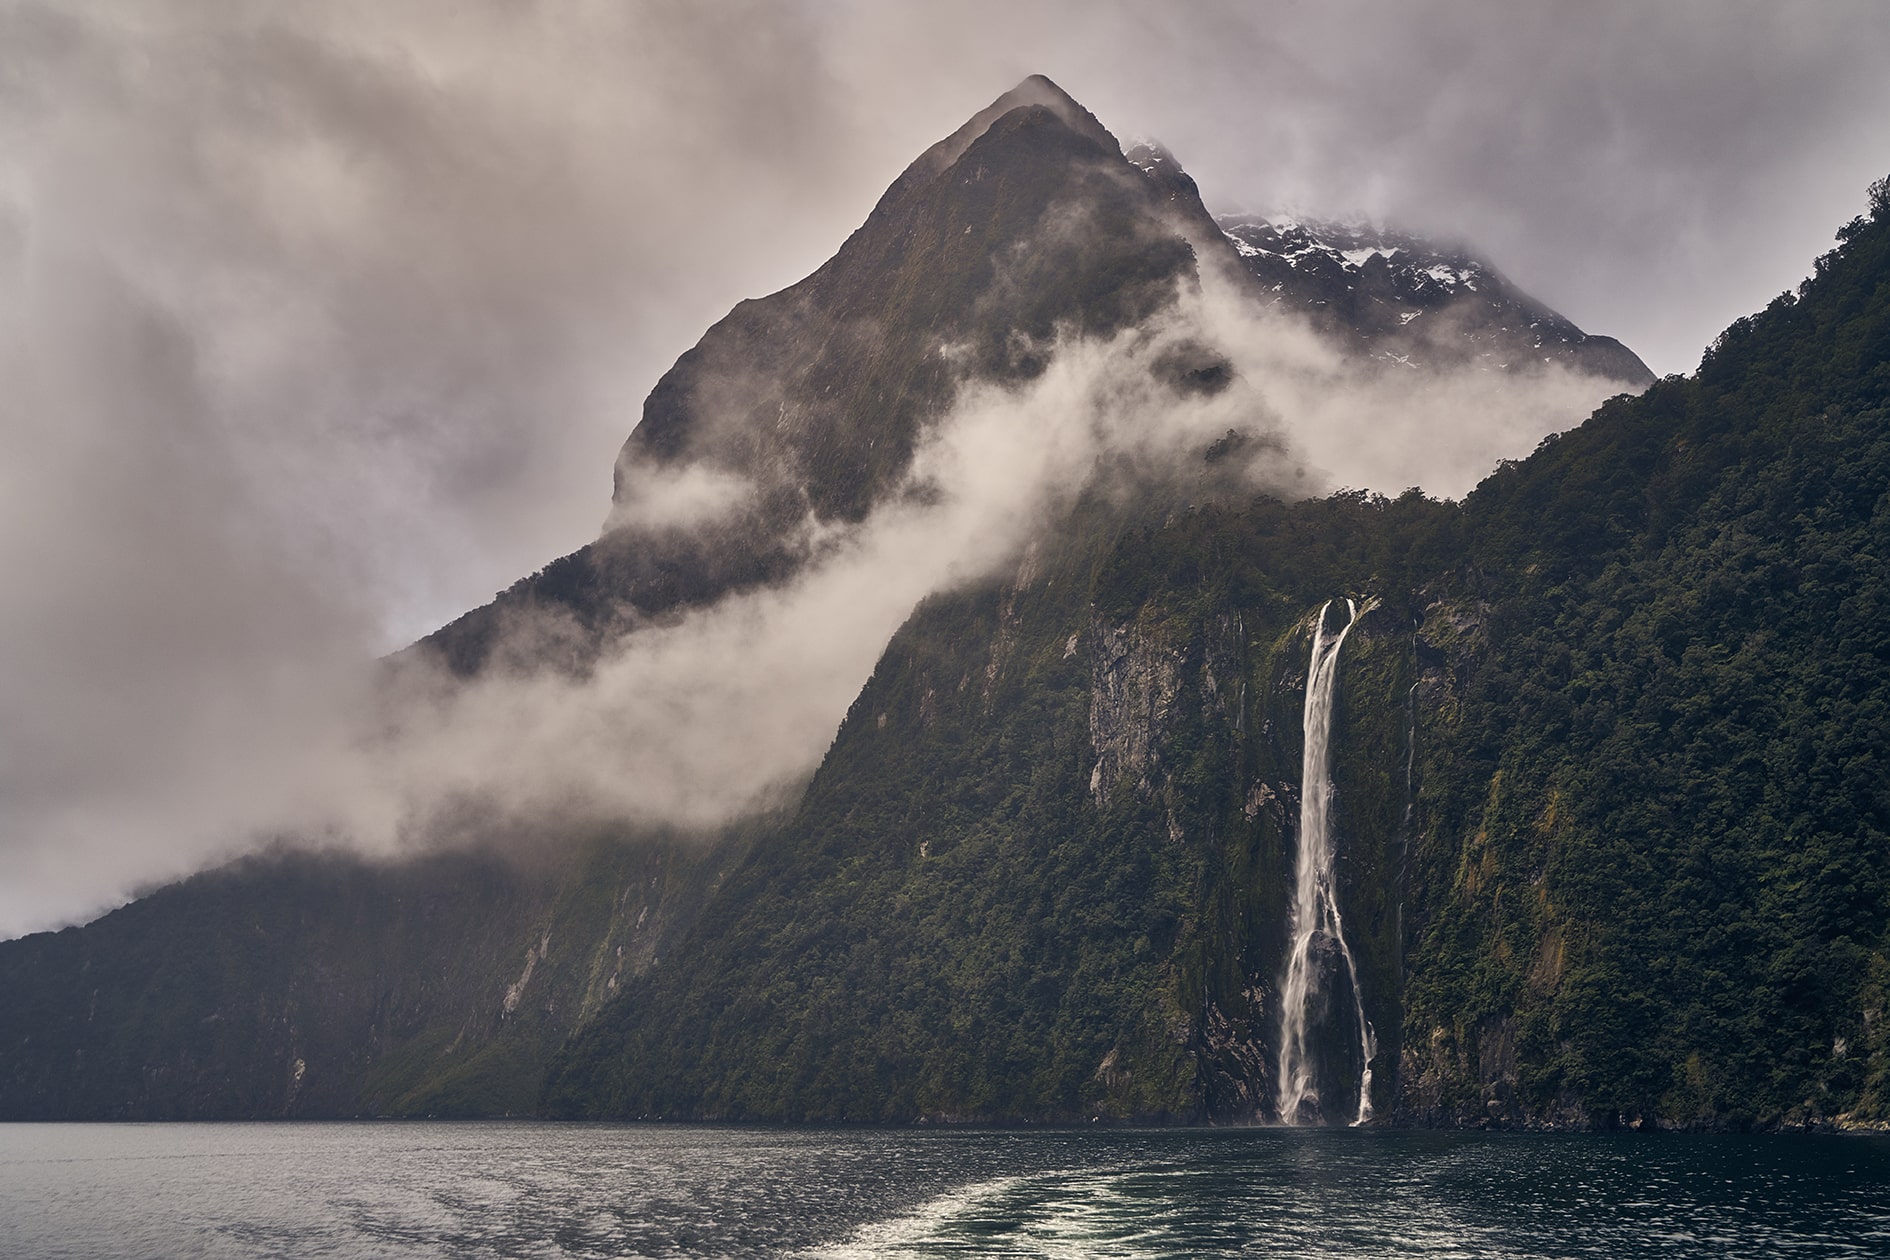 A cloudy day at Milford Sound, with a thin waterfall and mountain peaking through the clouds